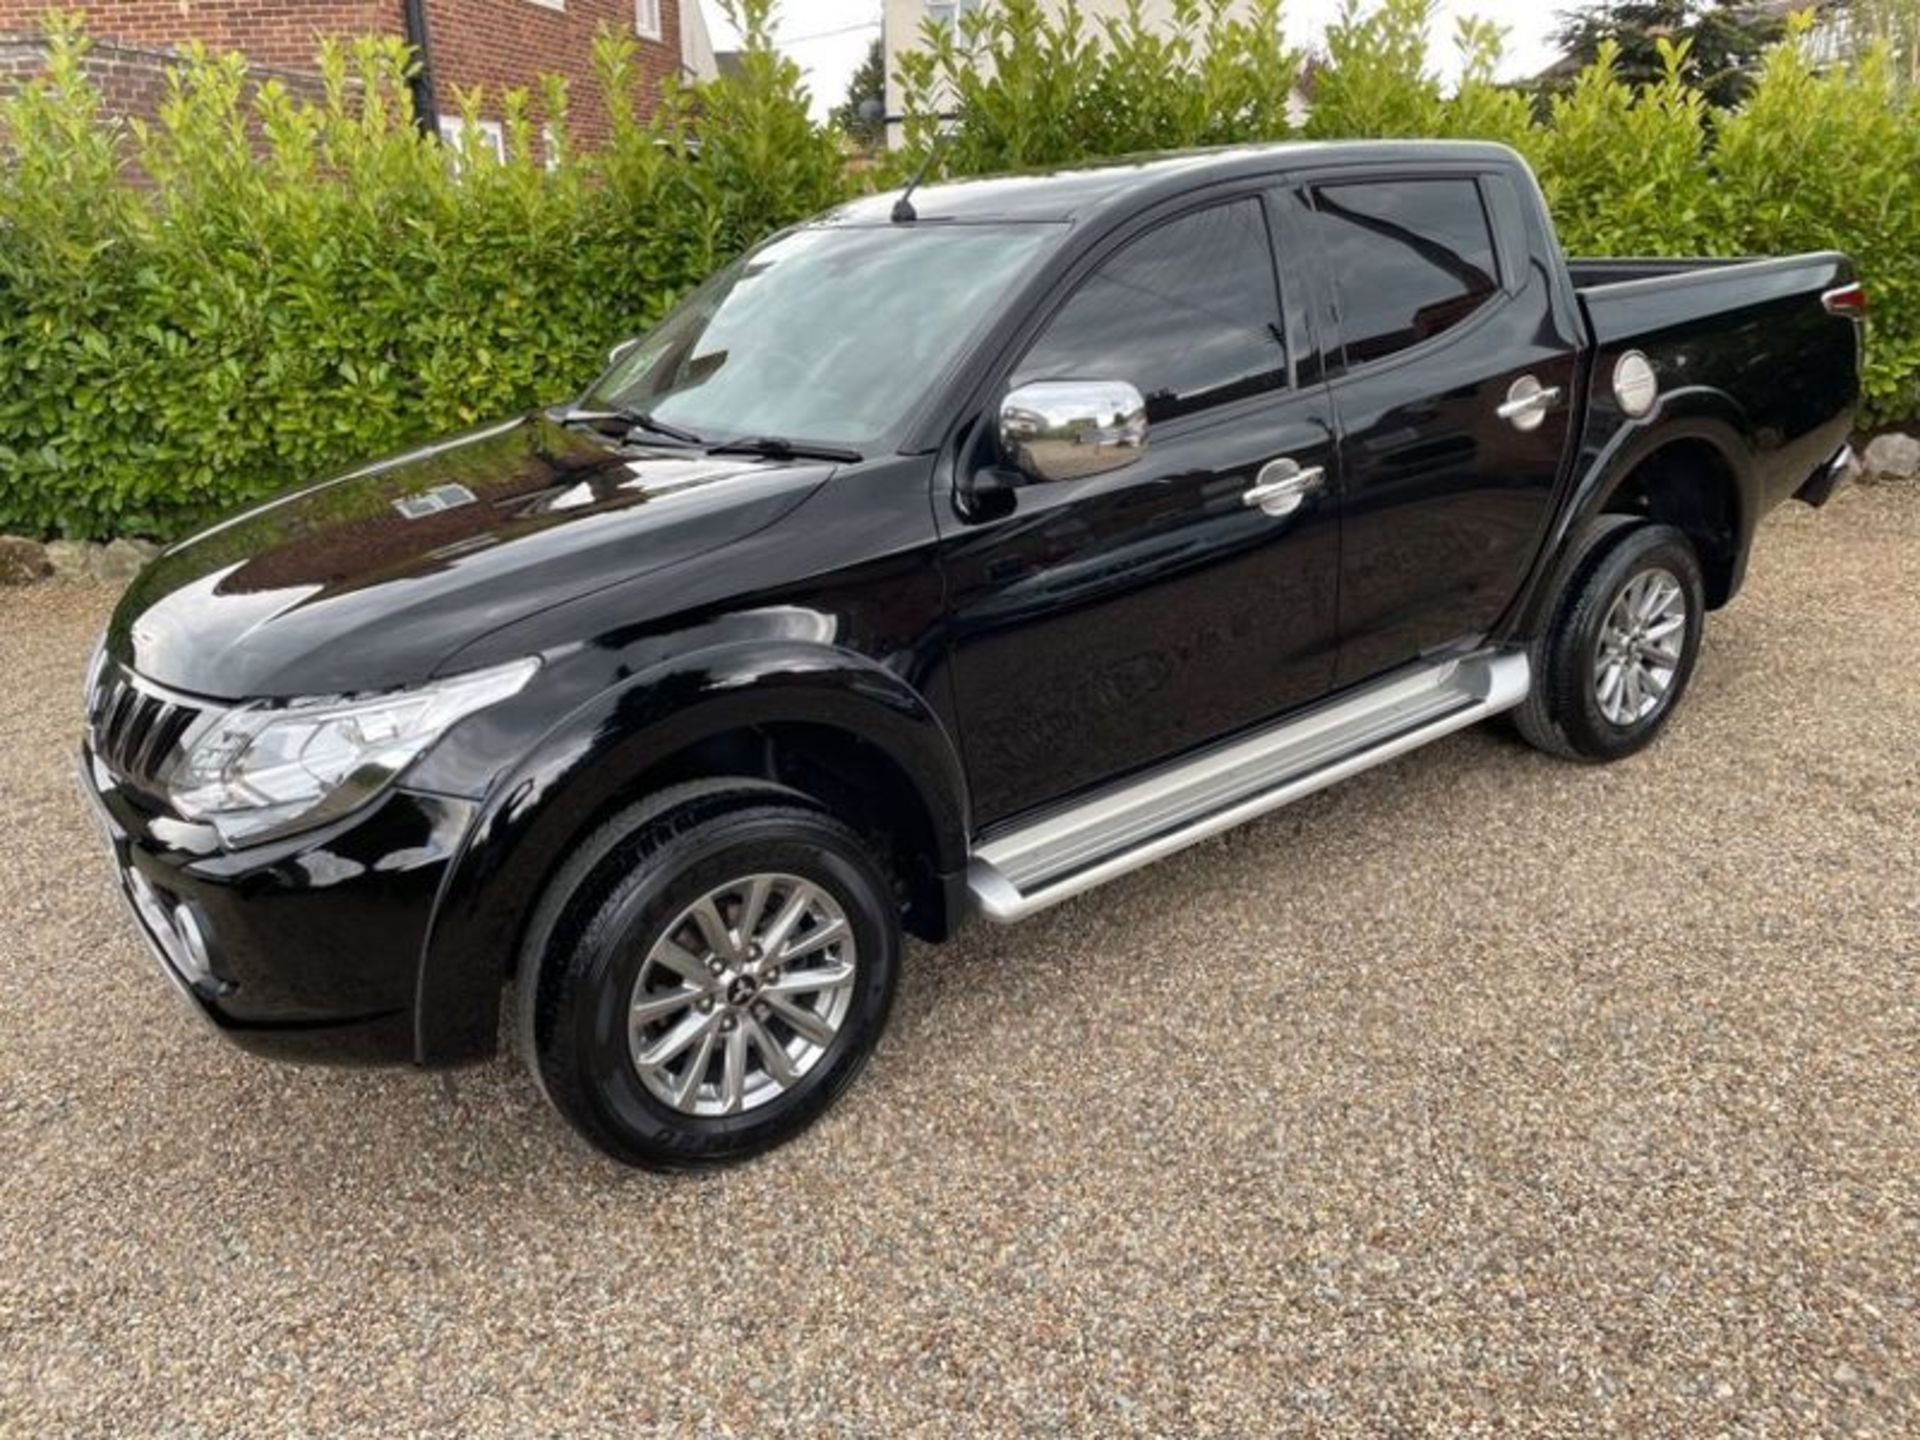 Mitsubishi L200 "Barbarian" Auto (178) 2018 Model - 1 Owner -Leather -Sat Nav -Cruise - Fully Loaded - Image 2 of 7